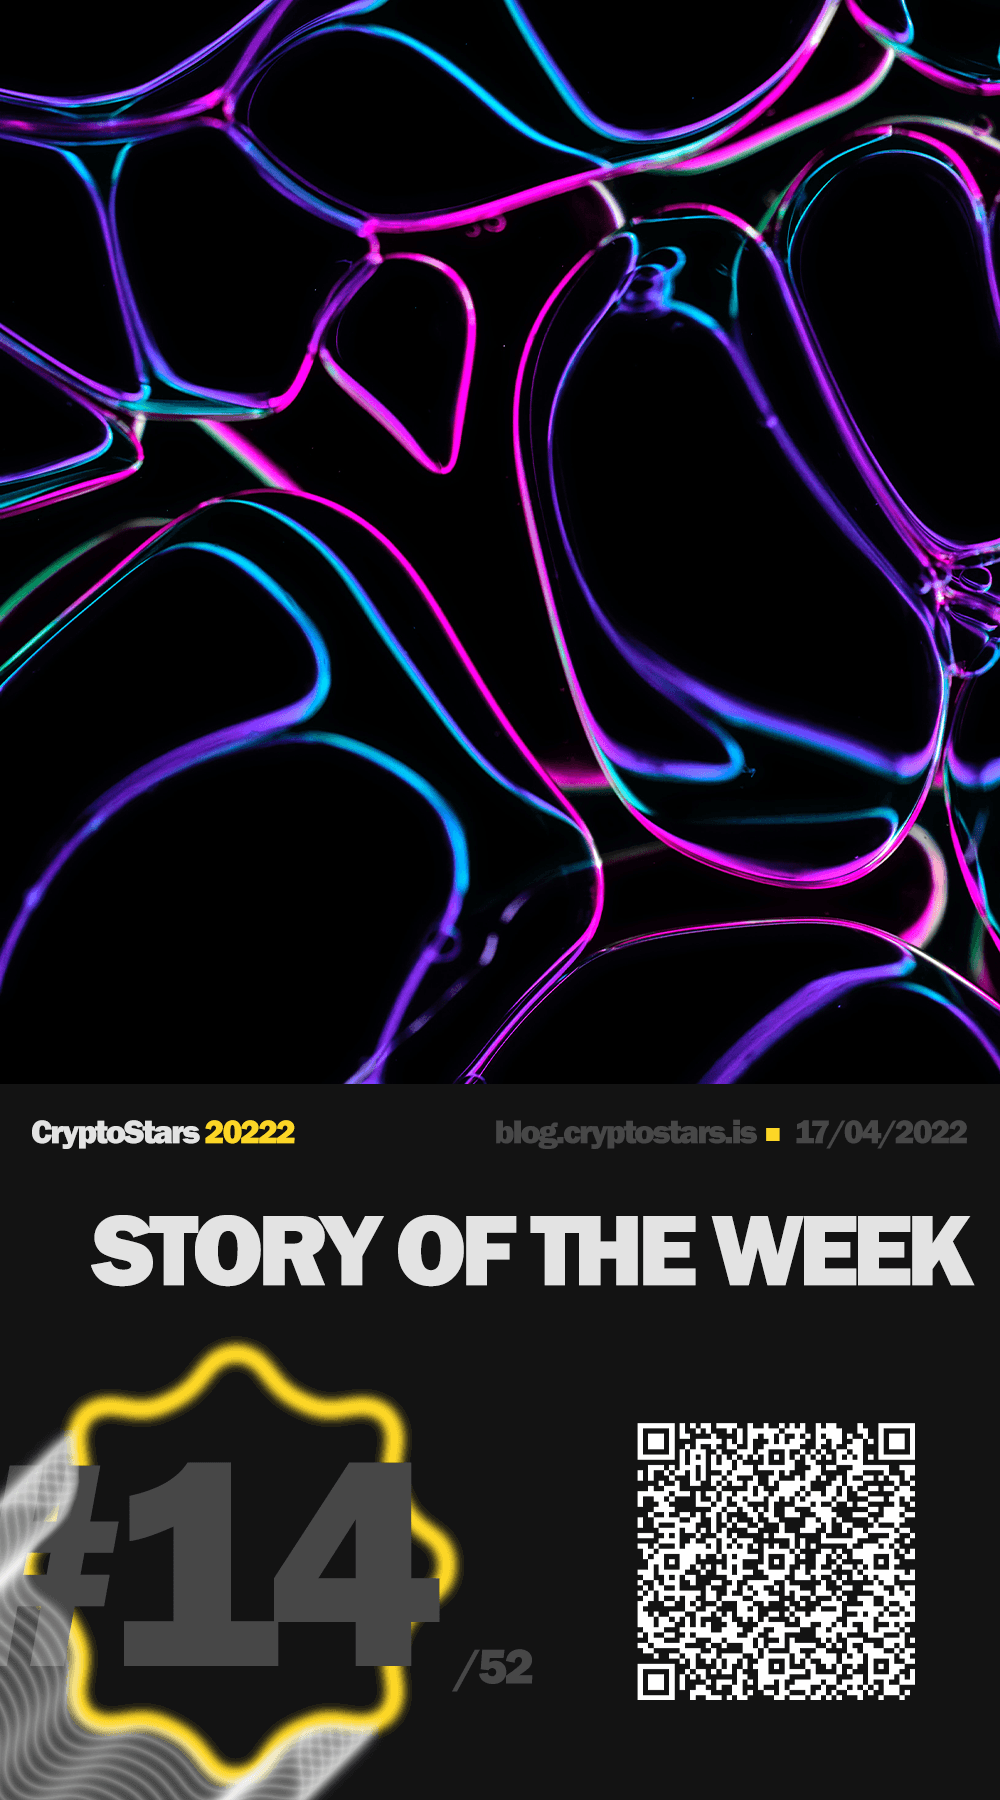 Story of the Week #14